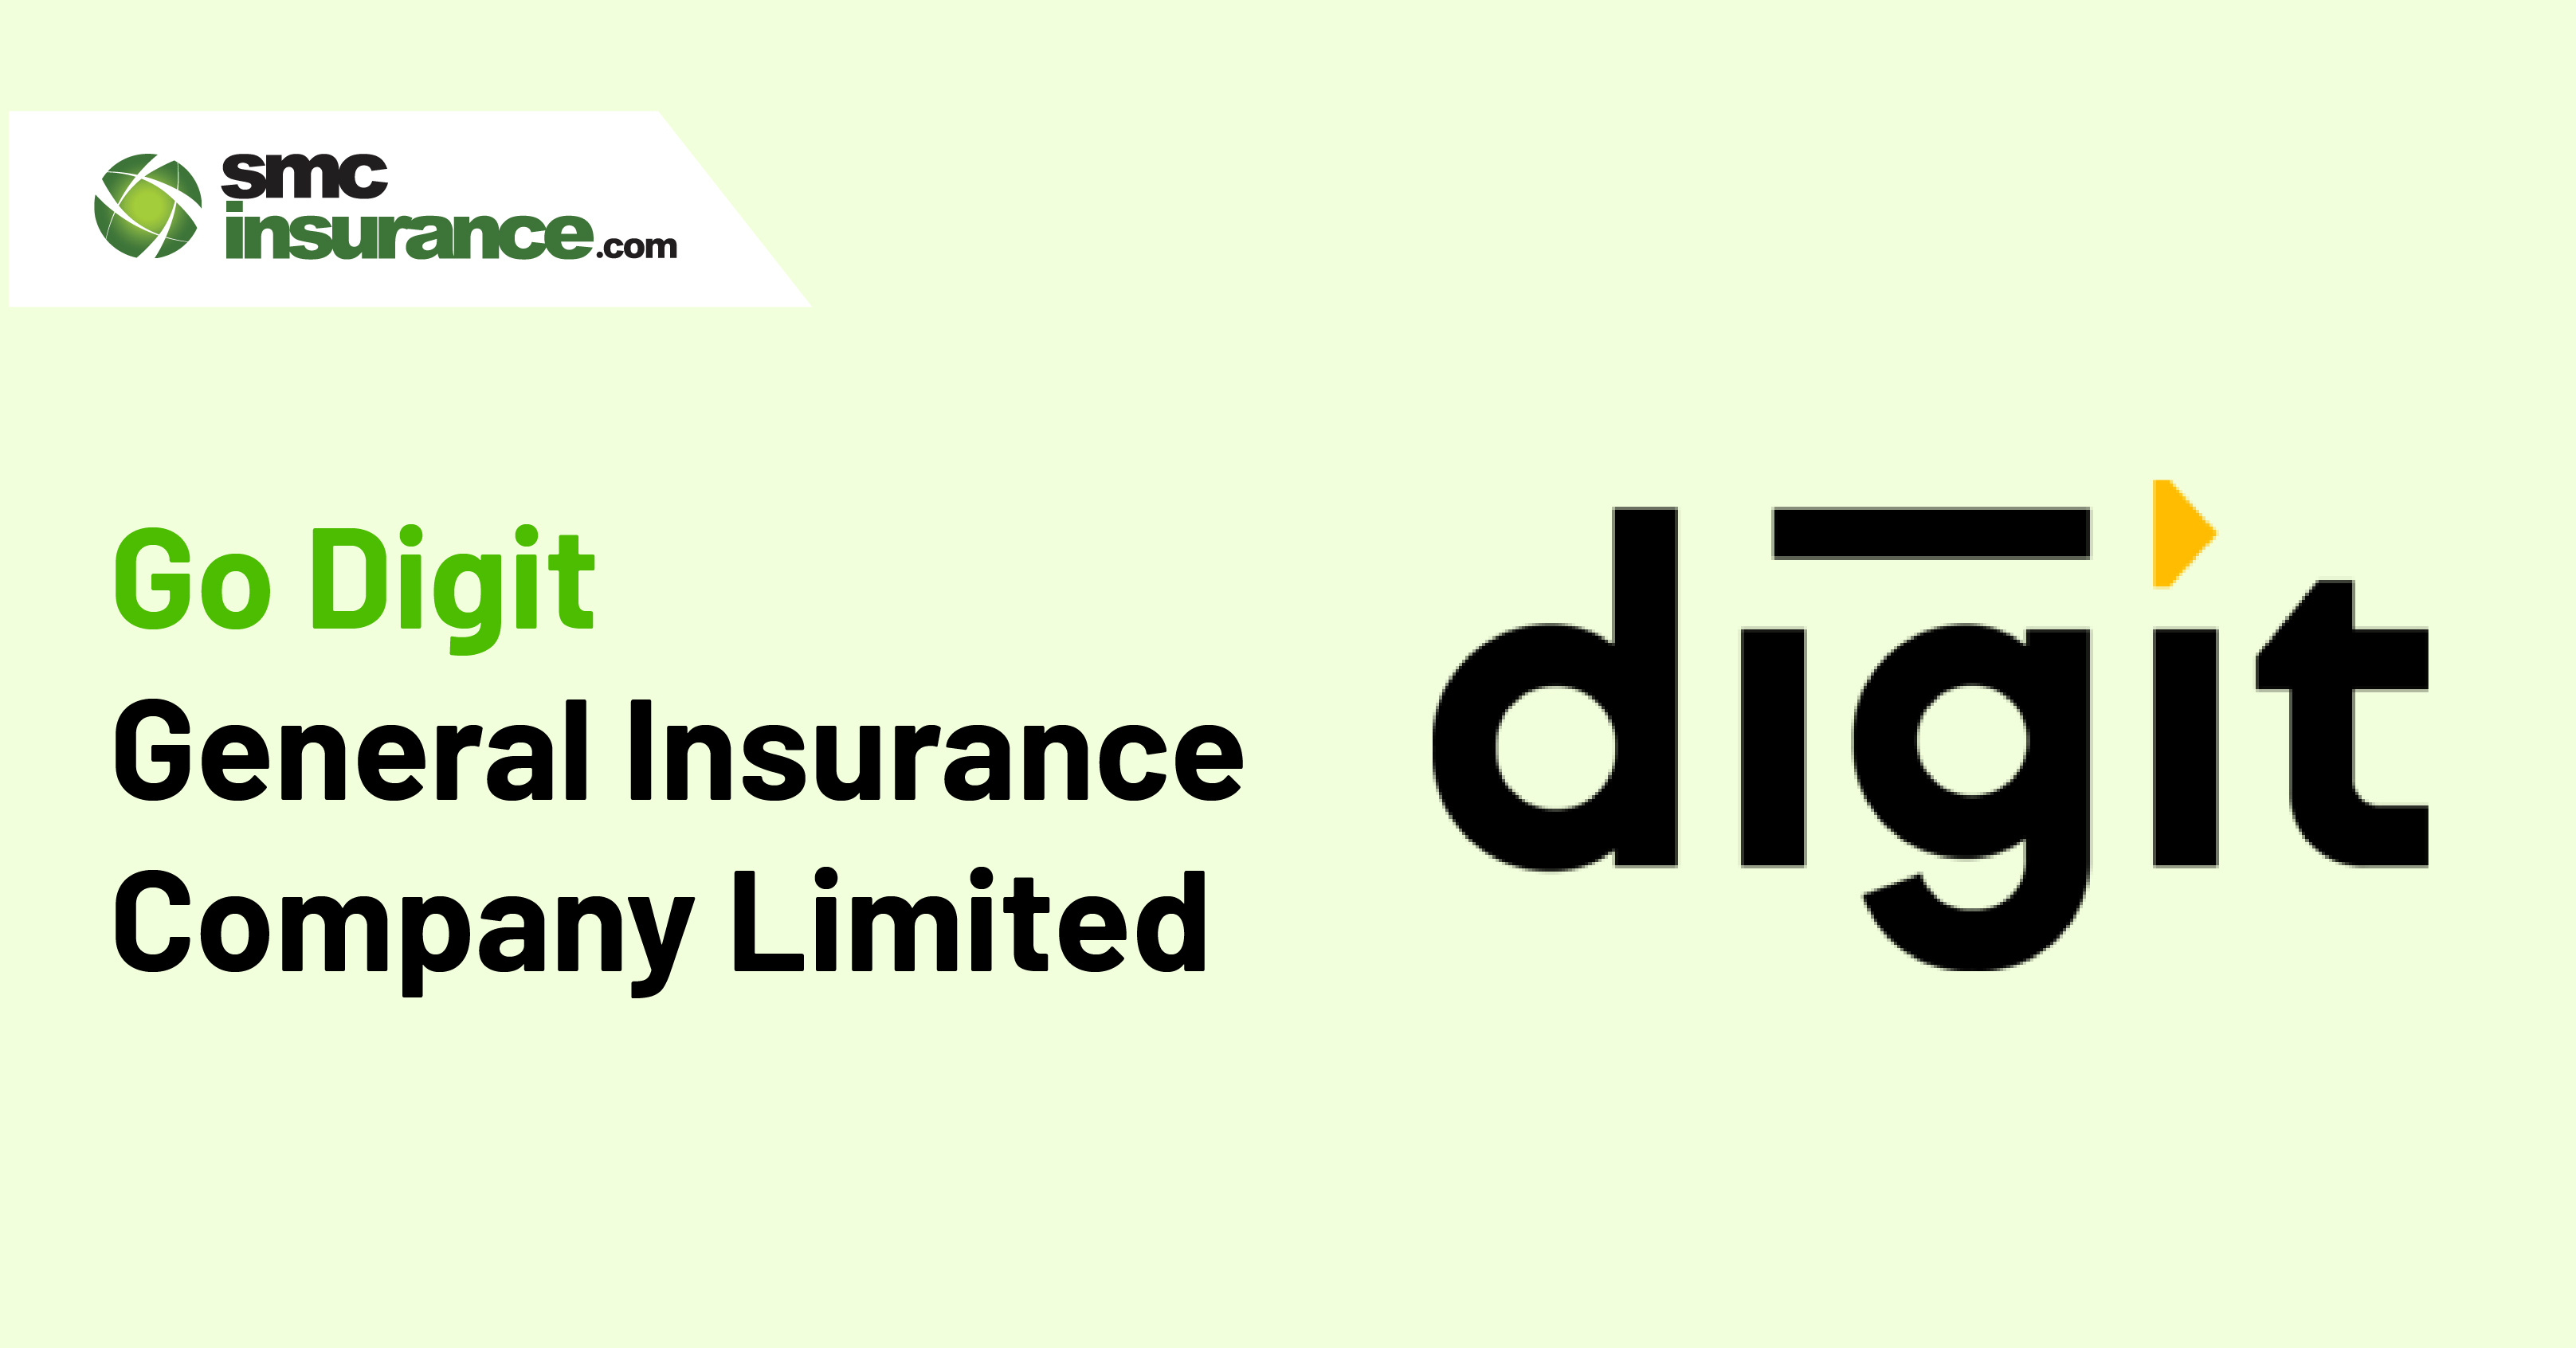 Go Digit General Insurance Company Limited